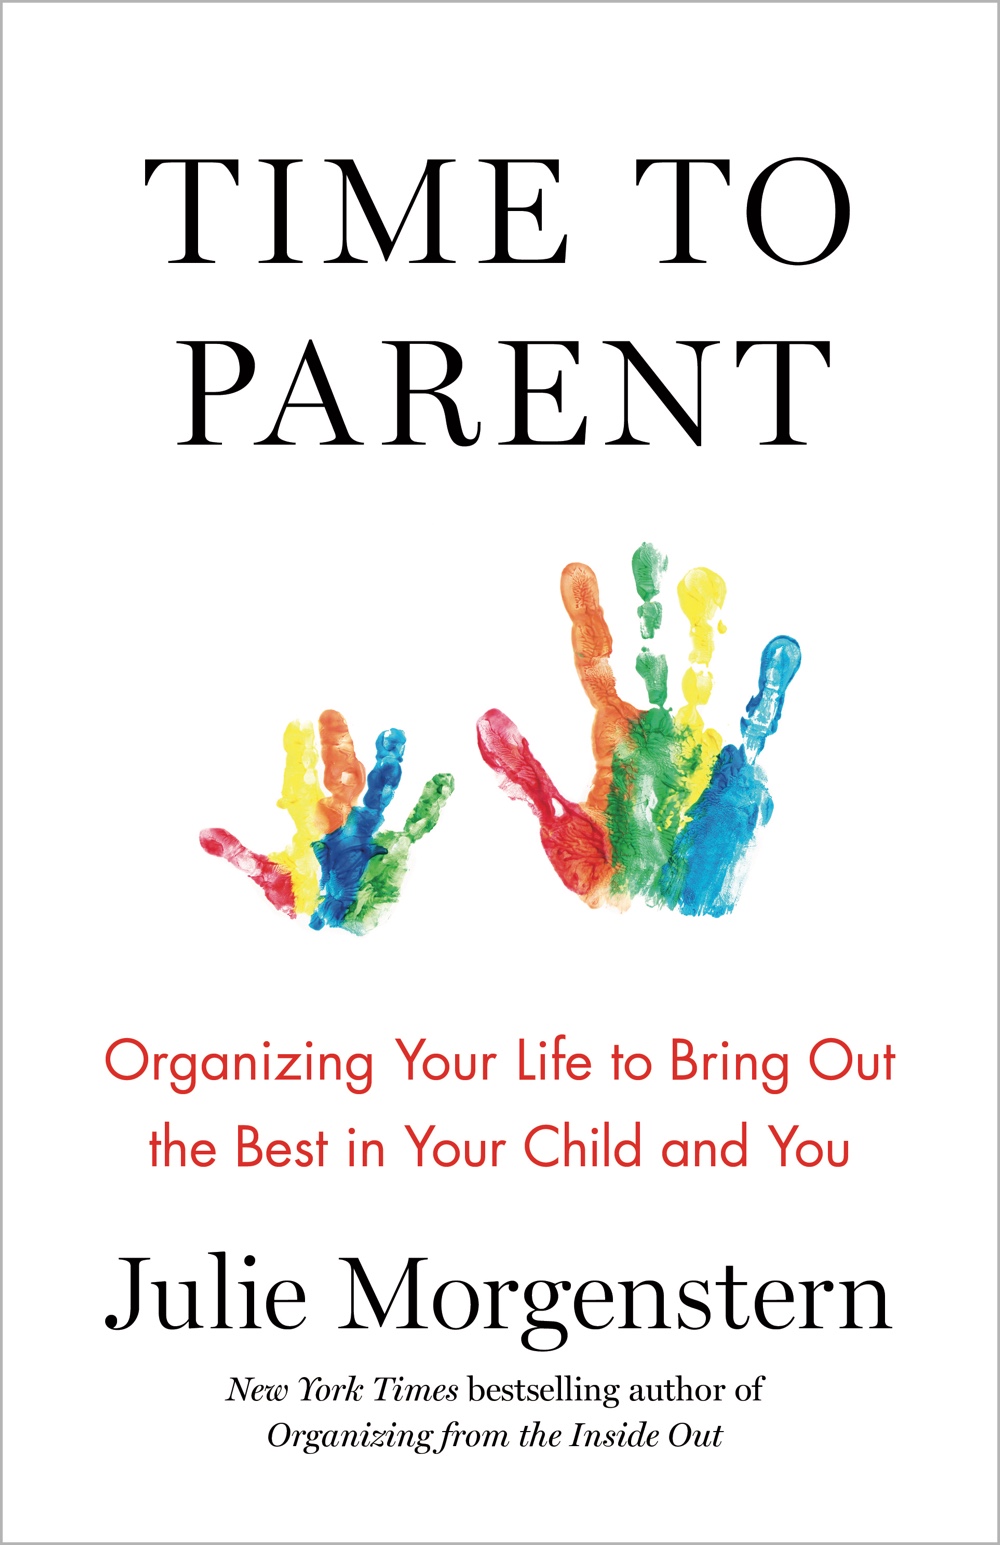 Time to Parent Book Launch